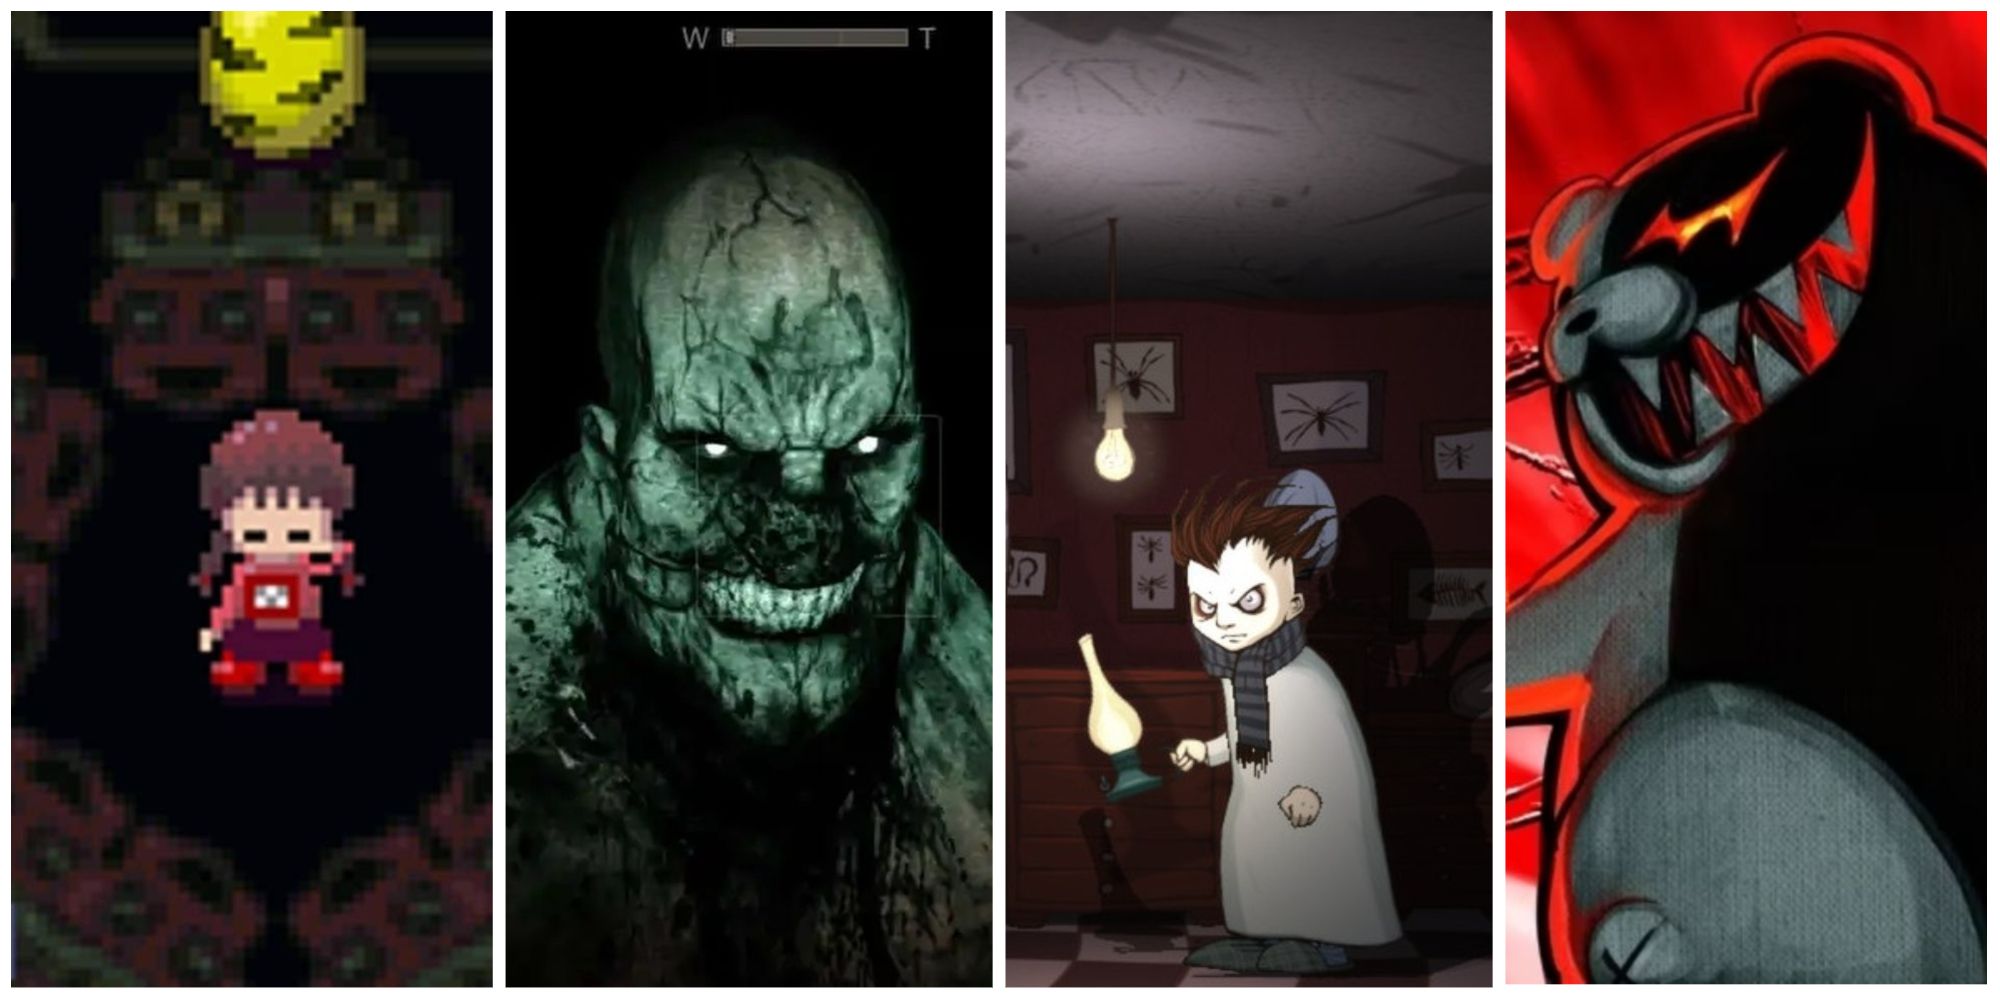 These are more underrated roblox horror games! Scary, but fun to